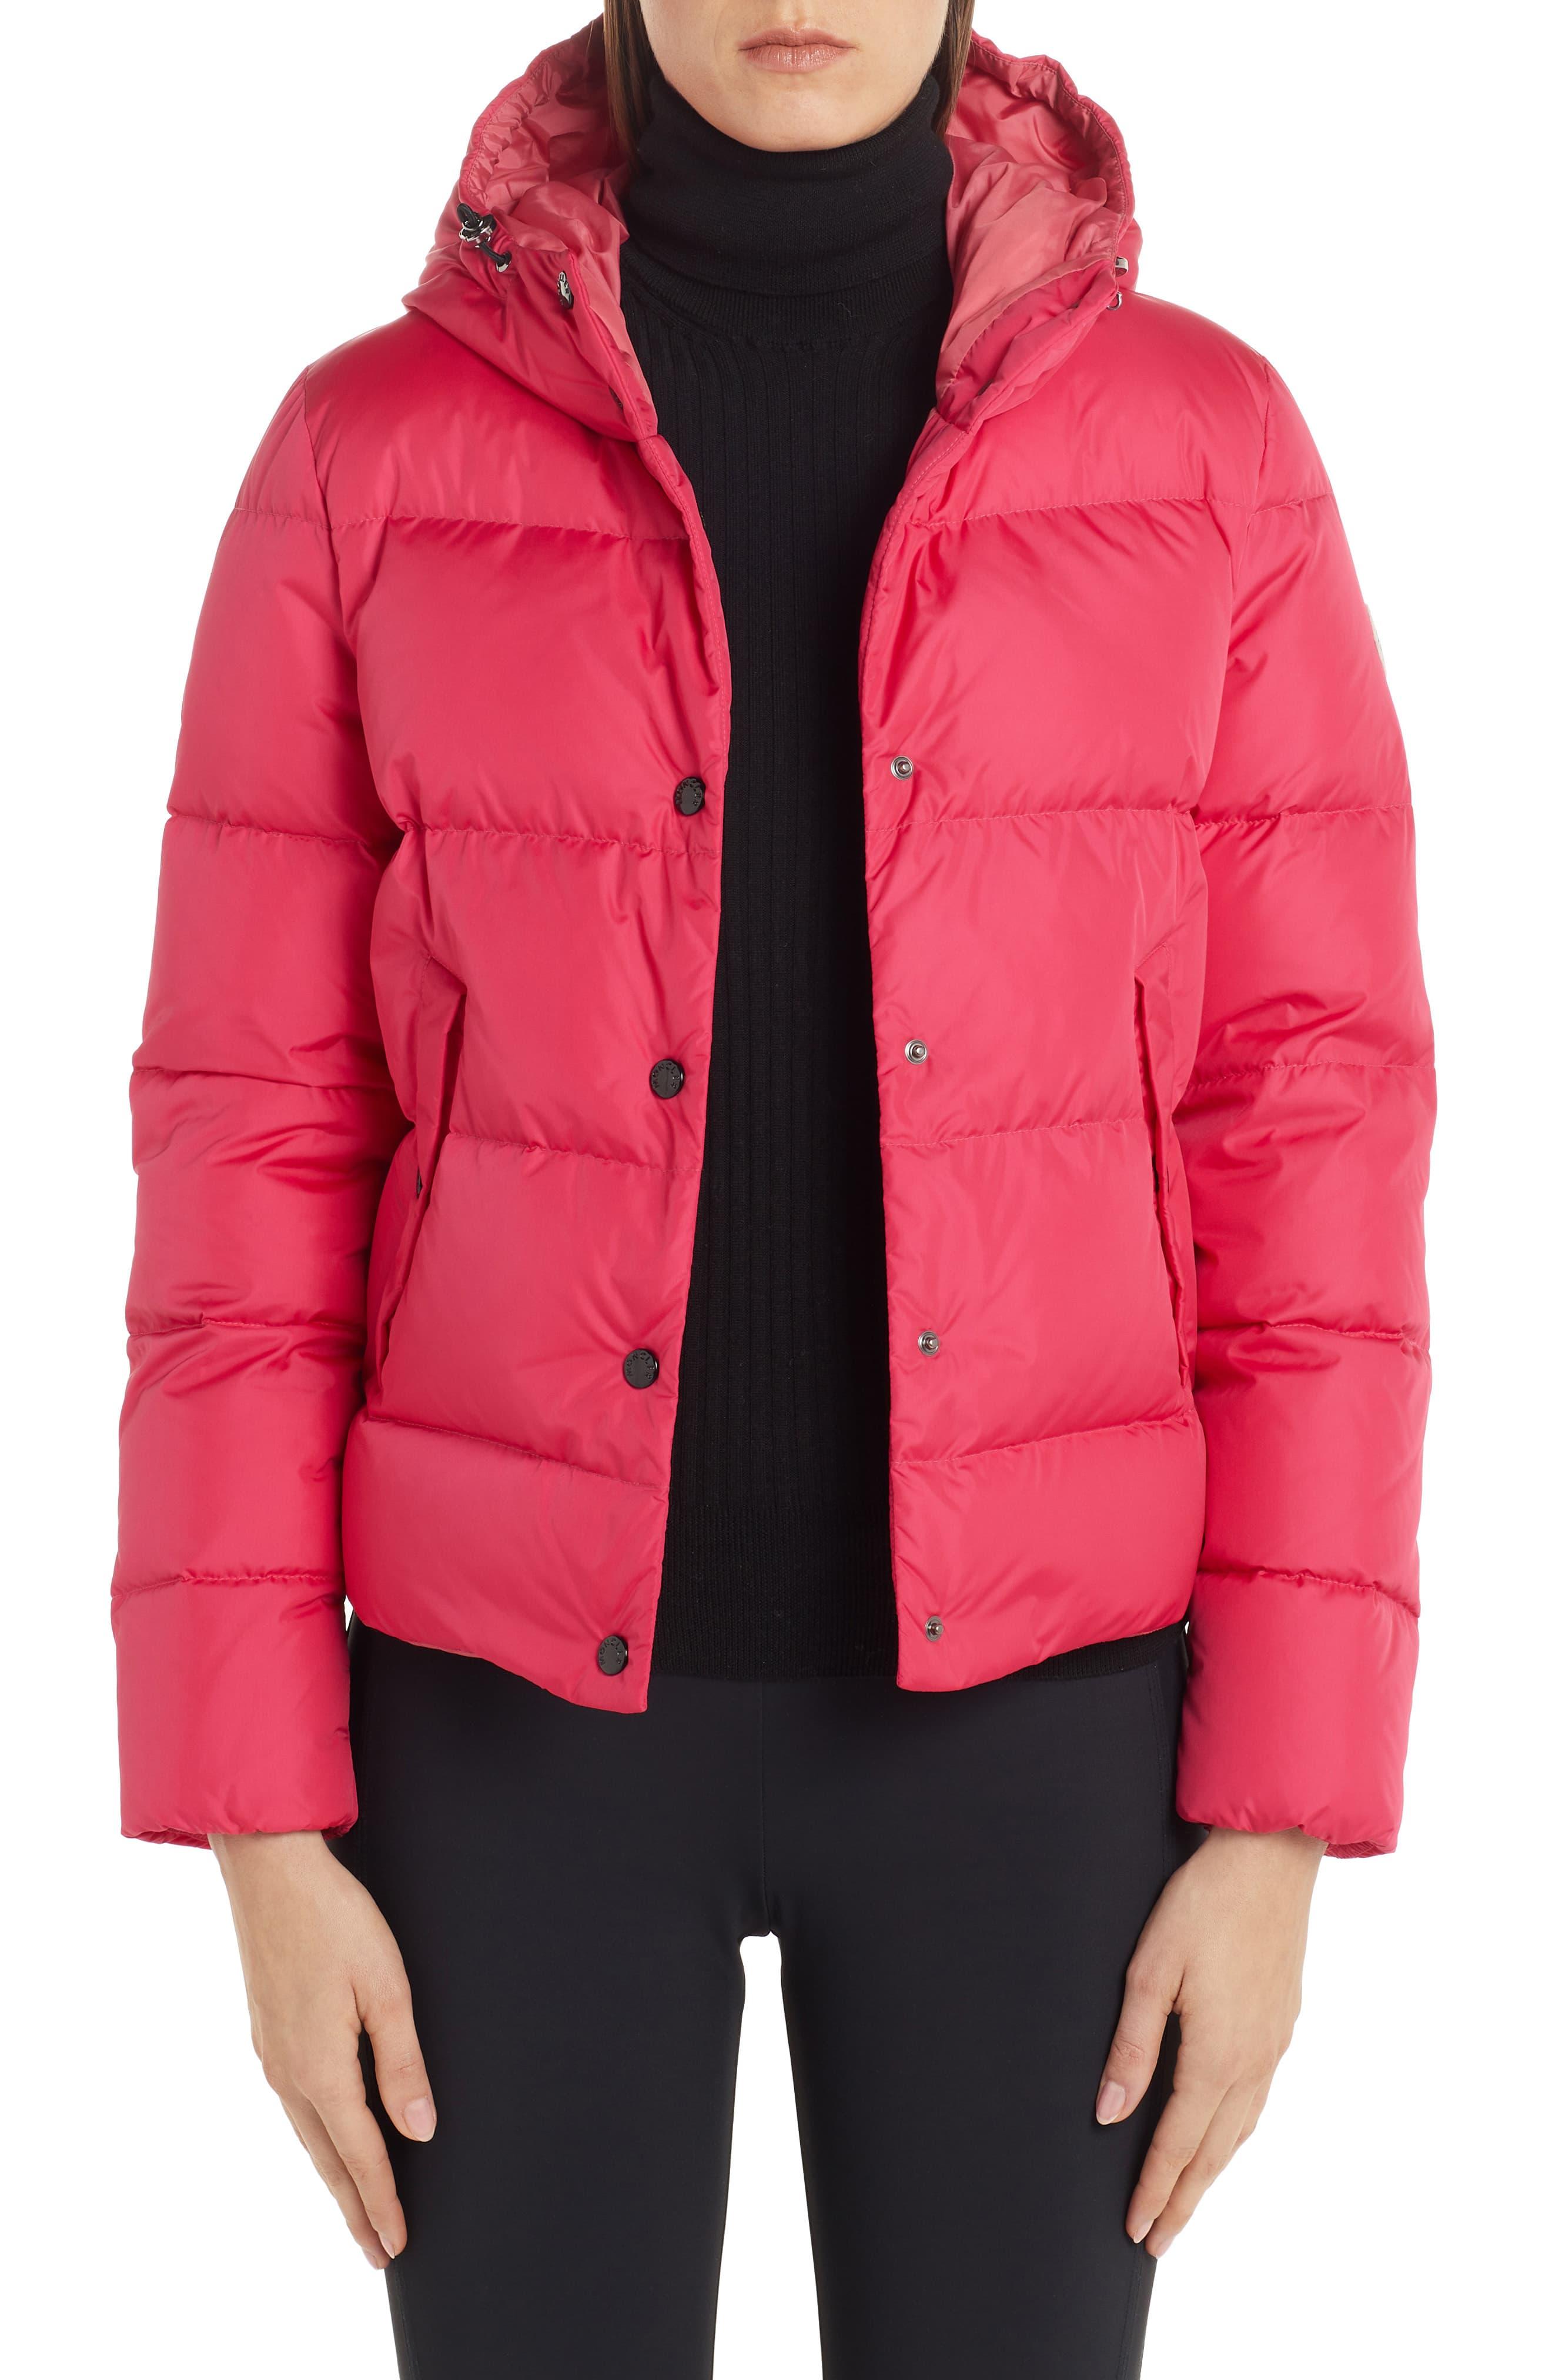 Moncler Lena Hooded Down Puffer Jacket in Pink - Lyst